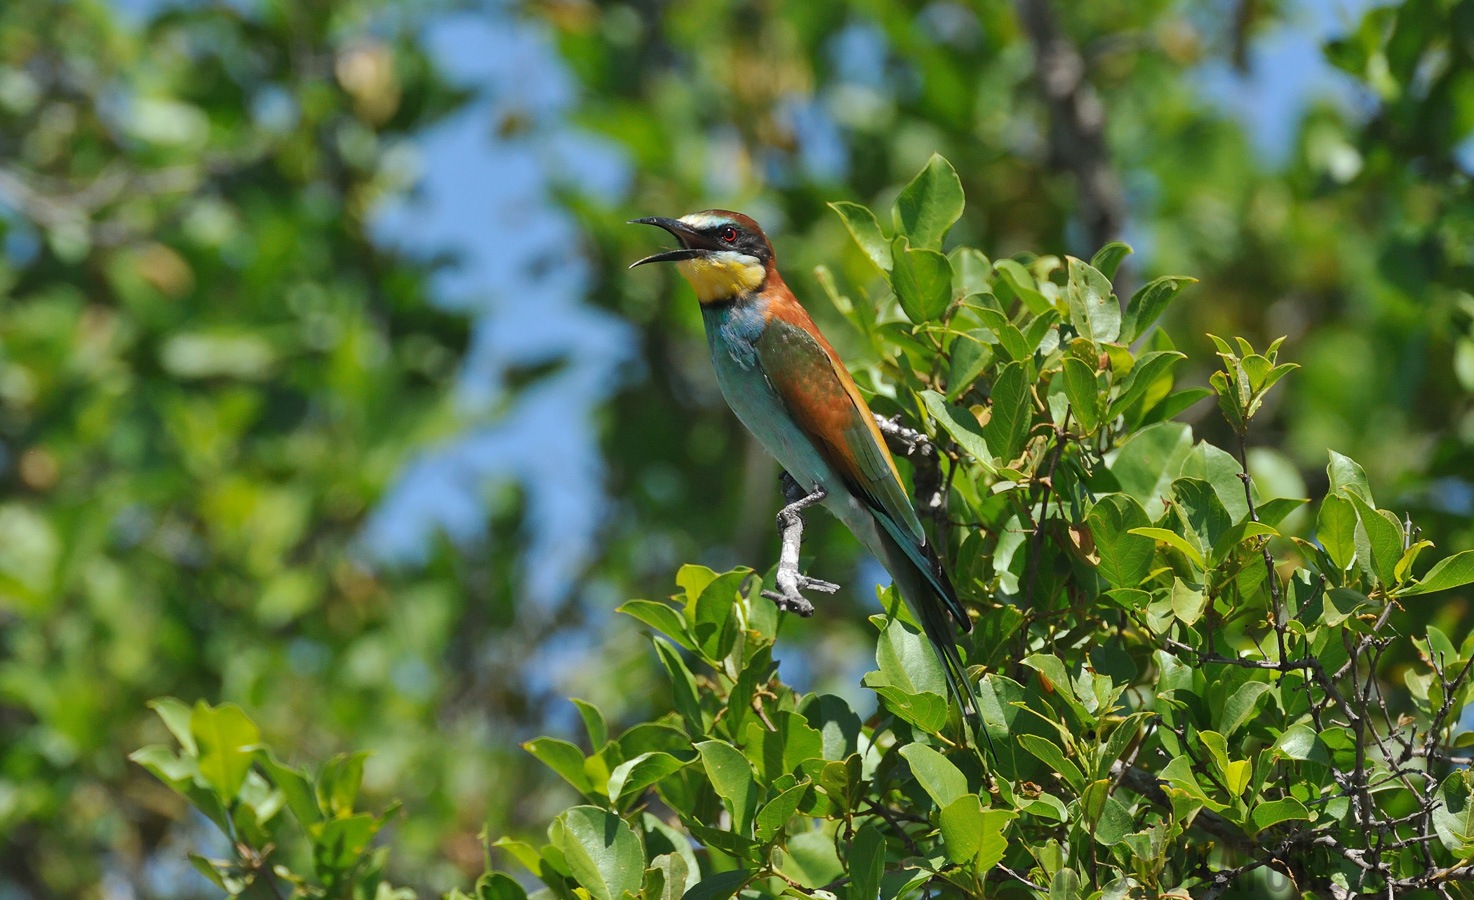 Merops apiaster [550 mm, 1/2500 sec at f / 8.0, ISO 1600]